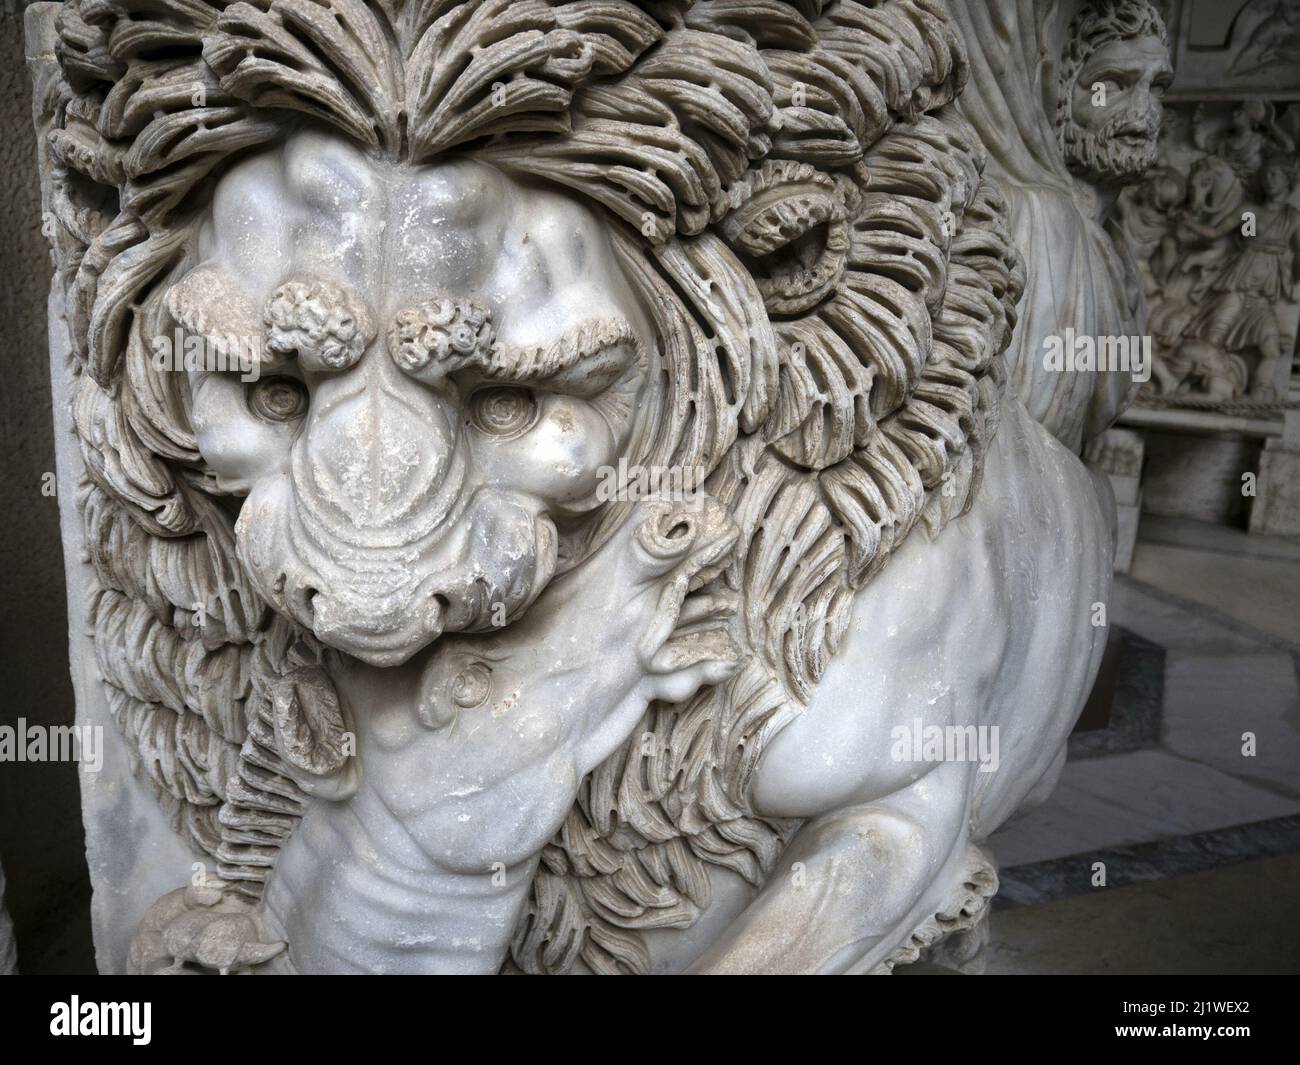 lion killing an horse Roman statue animal old marble sculpture detail Stock Photo